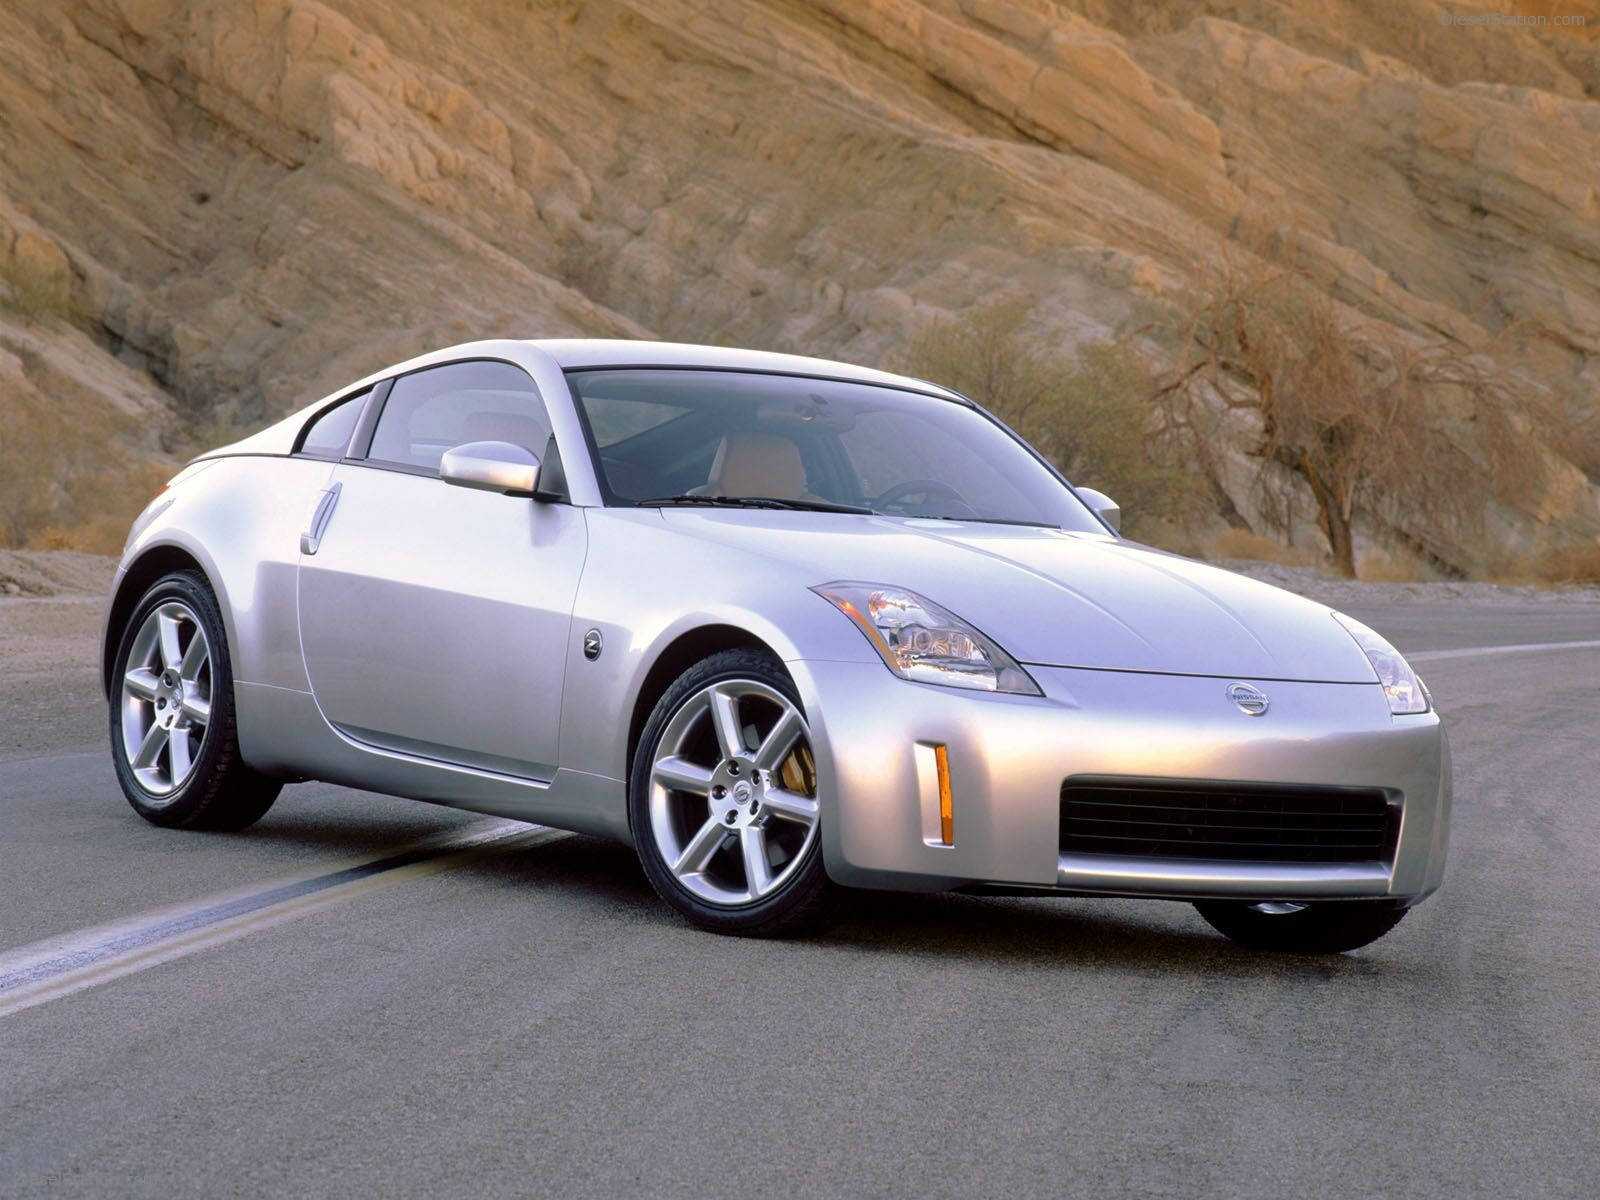 Make a bold statement with the Nissan 350Z and its advanced design. Wallpaper